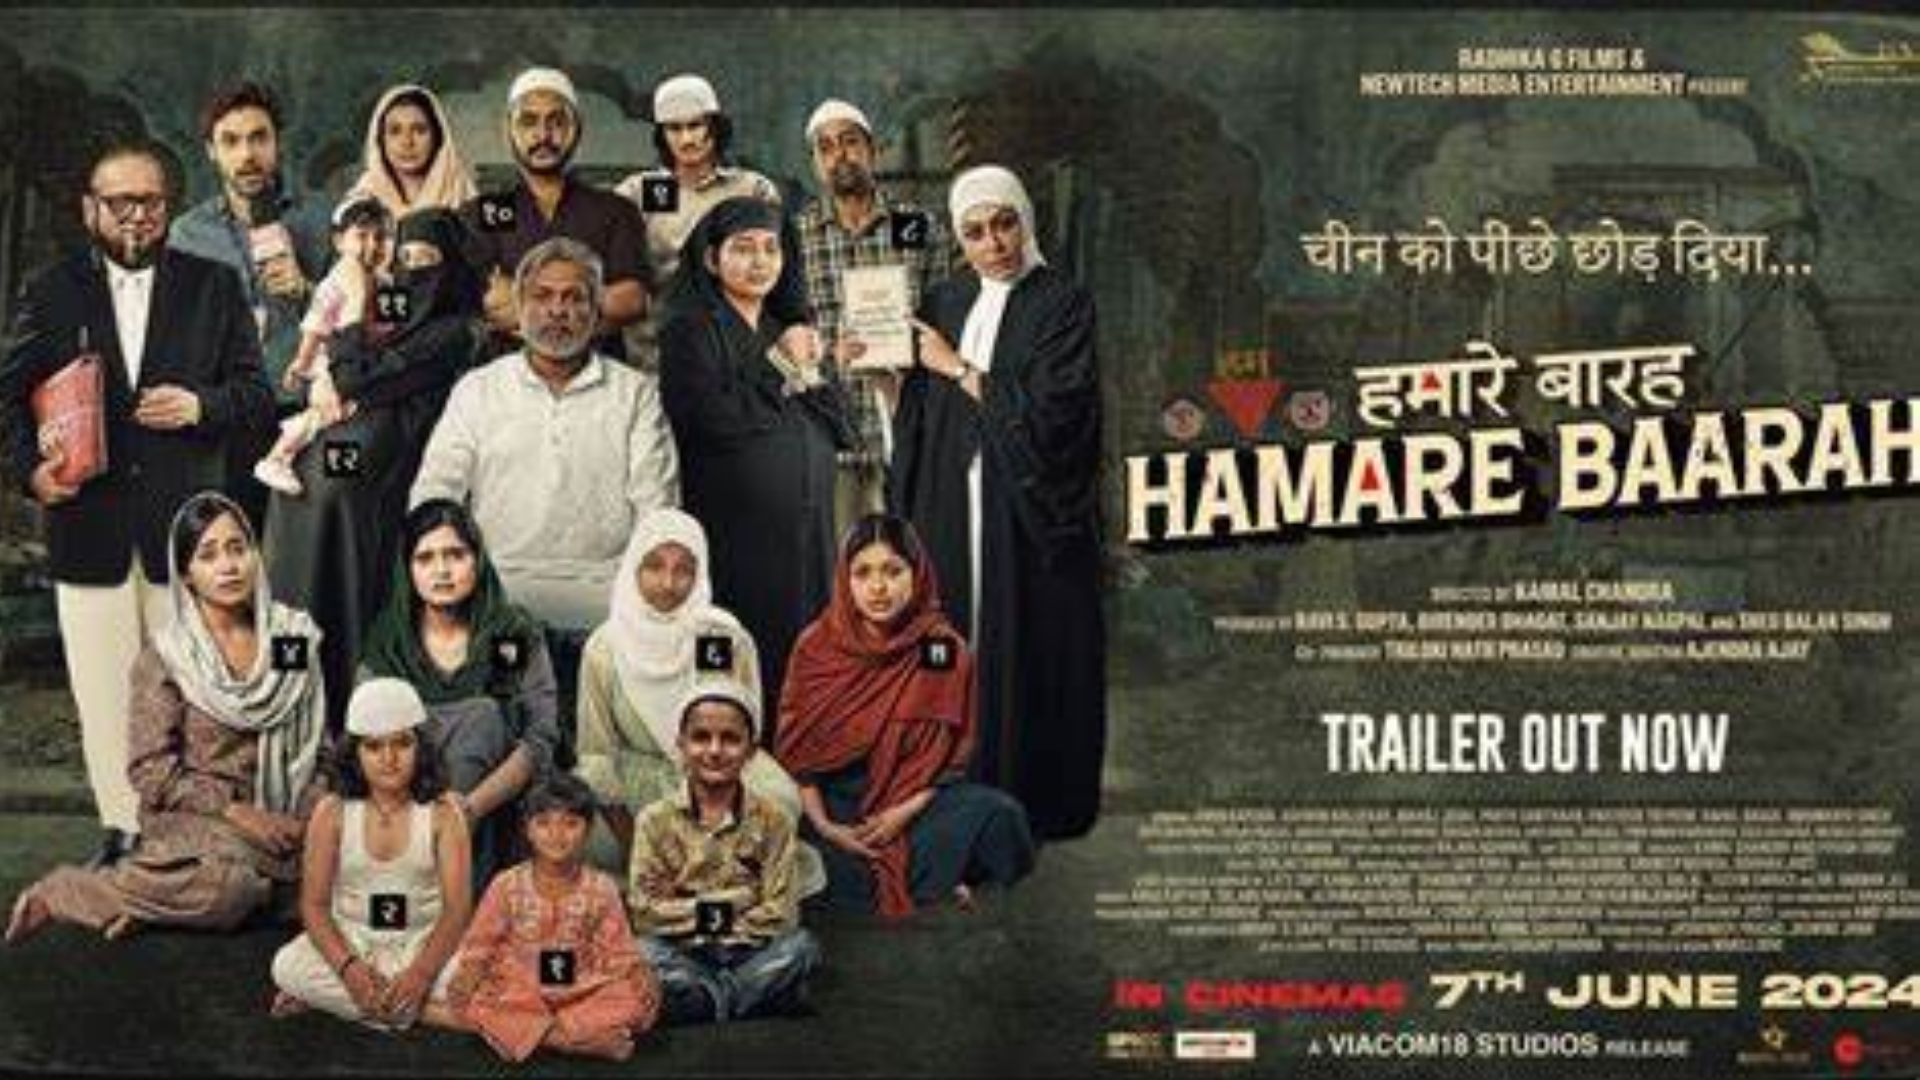 Hamare Baarah: Bombay HC Approves Release After Makers Remove Objectionable Content